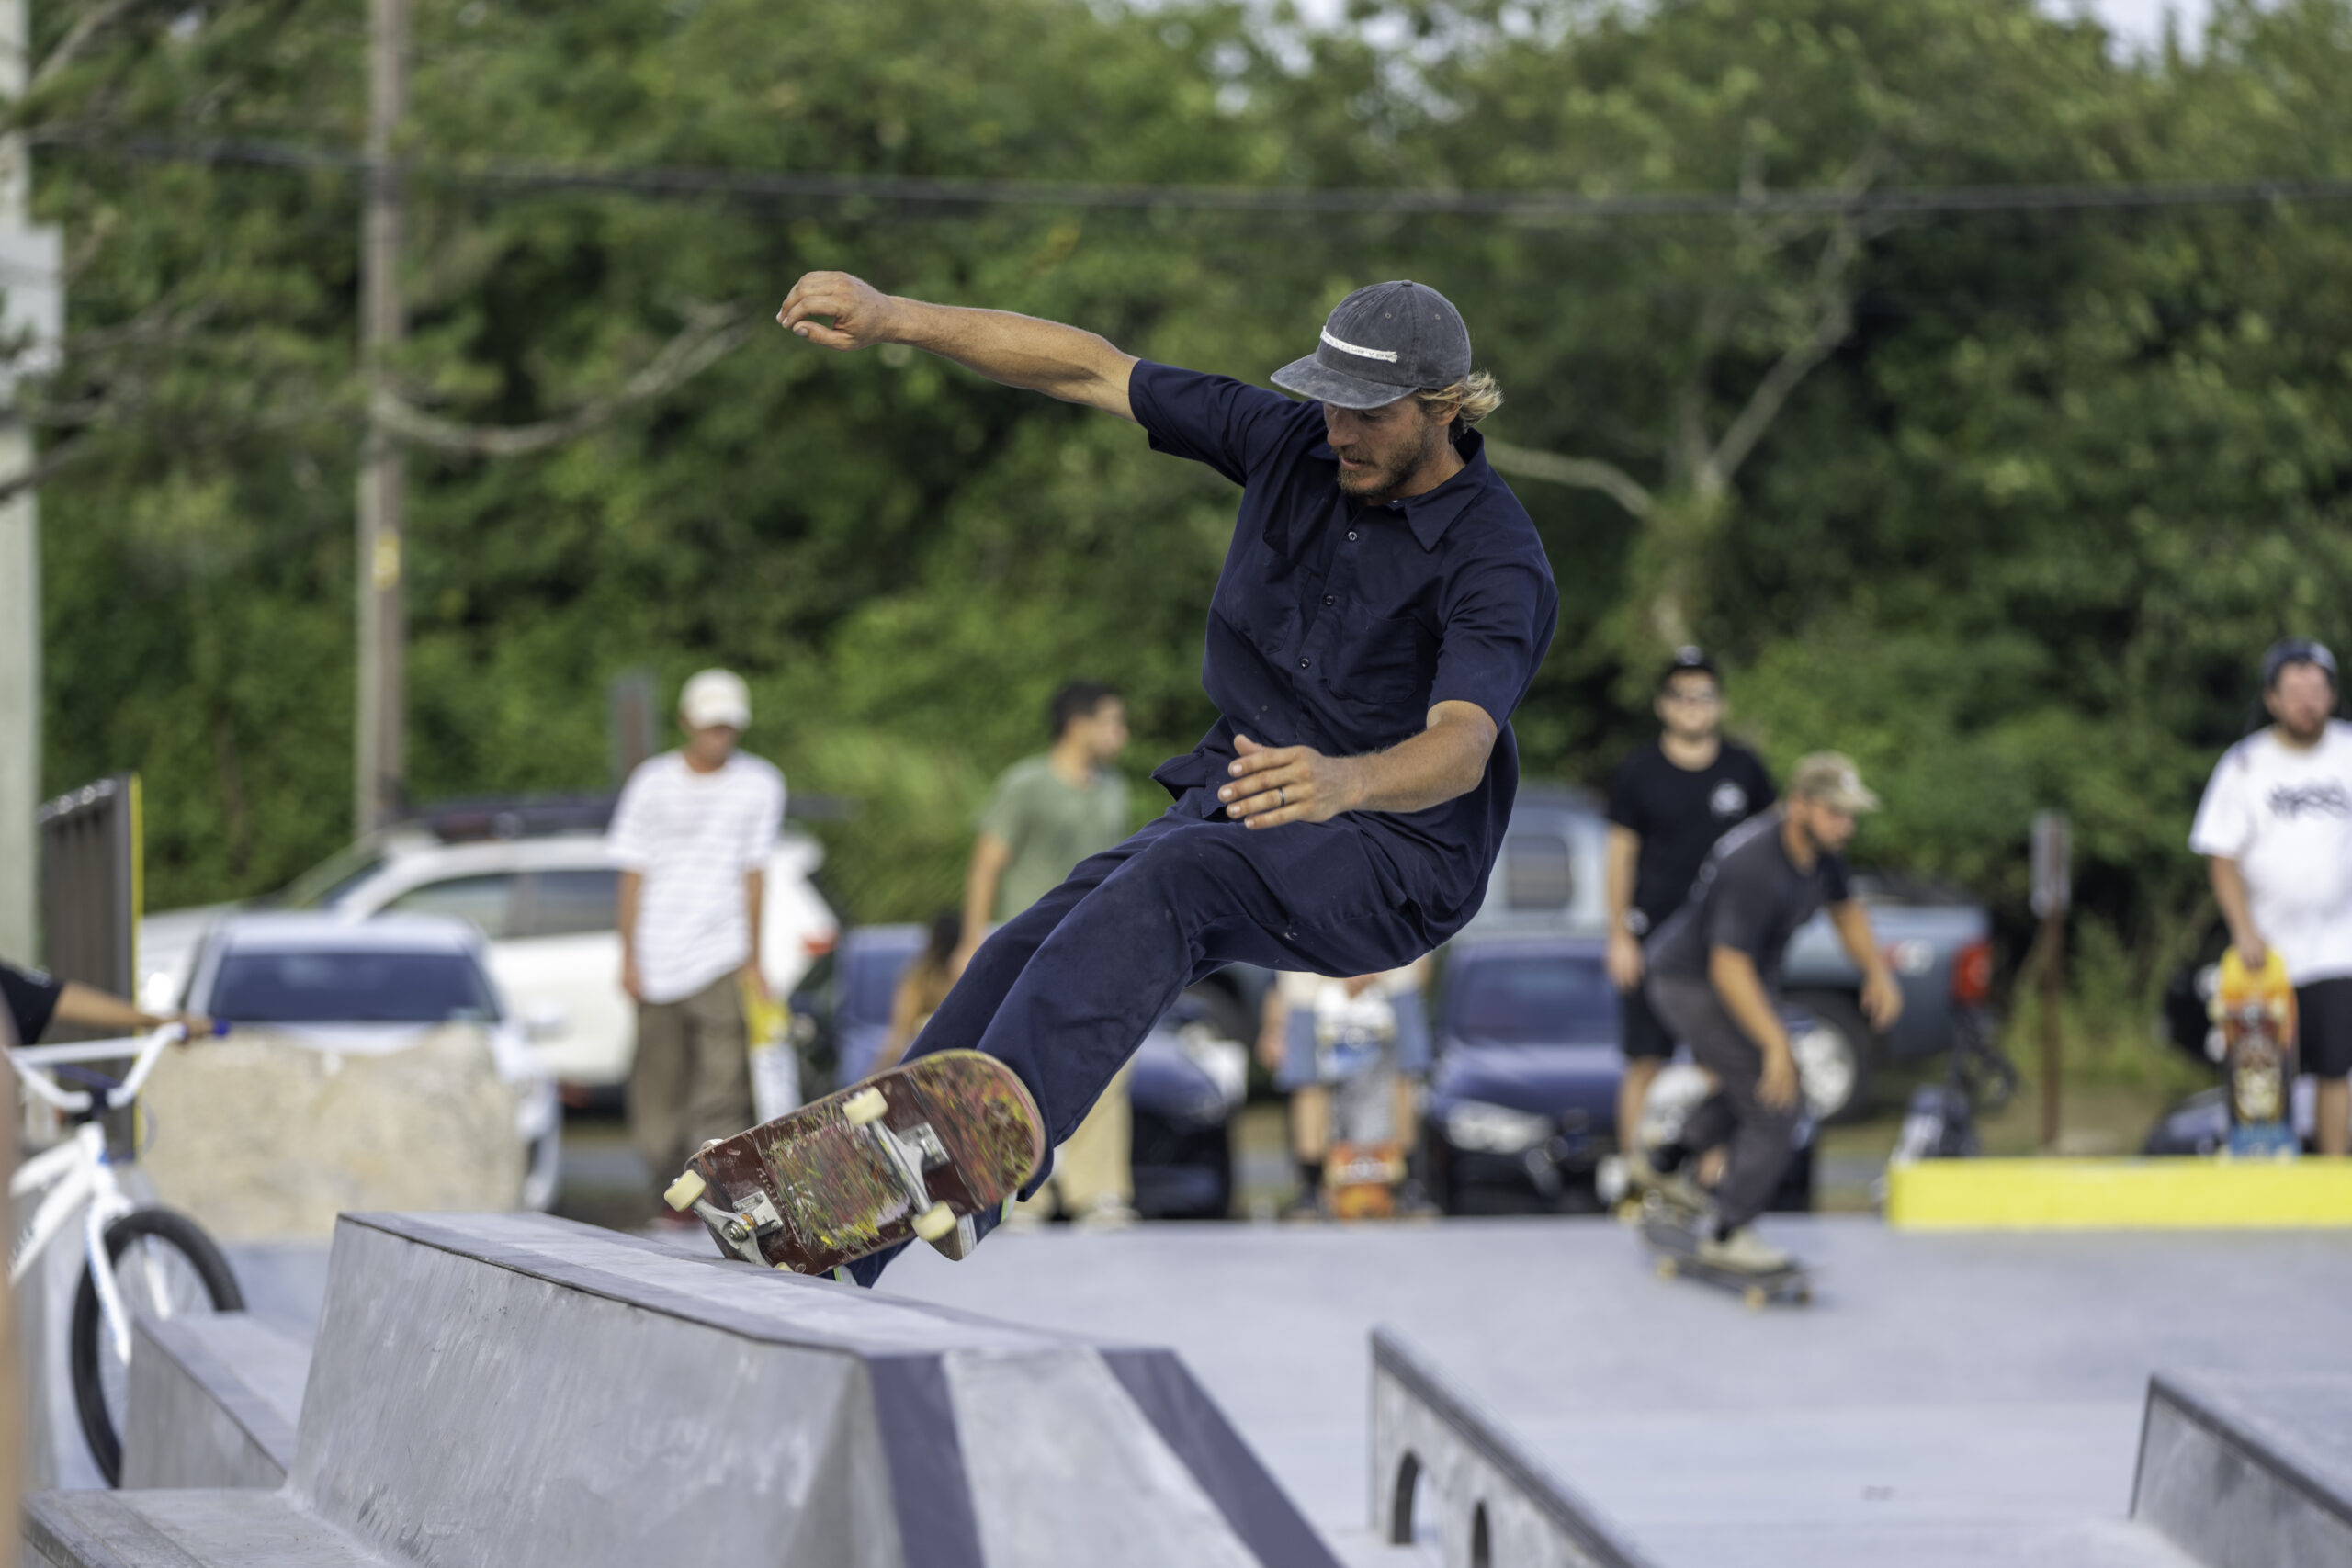 Ben Horan of Pivot Custom tests out his handiwork at the grand opening of the Montauk Skate Park on Friday. RON ESPOSITO PHOTOS